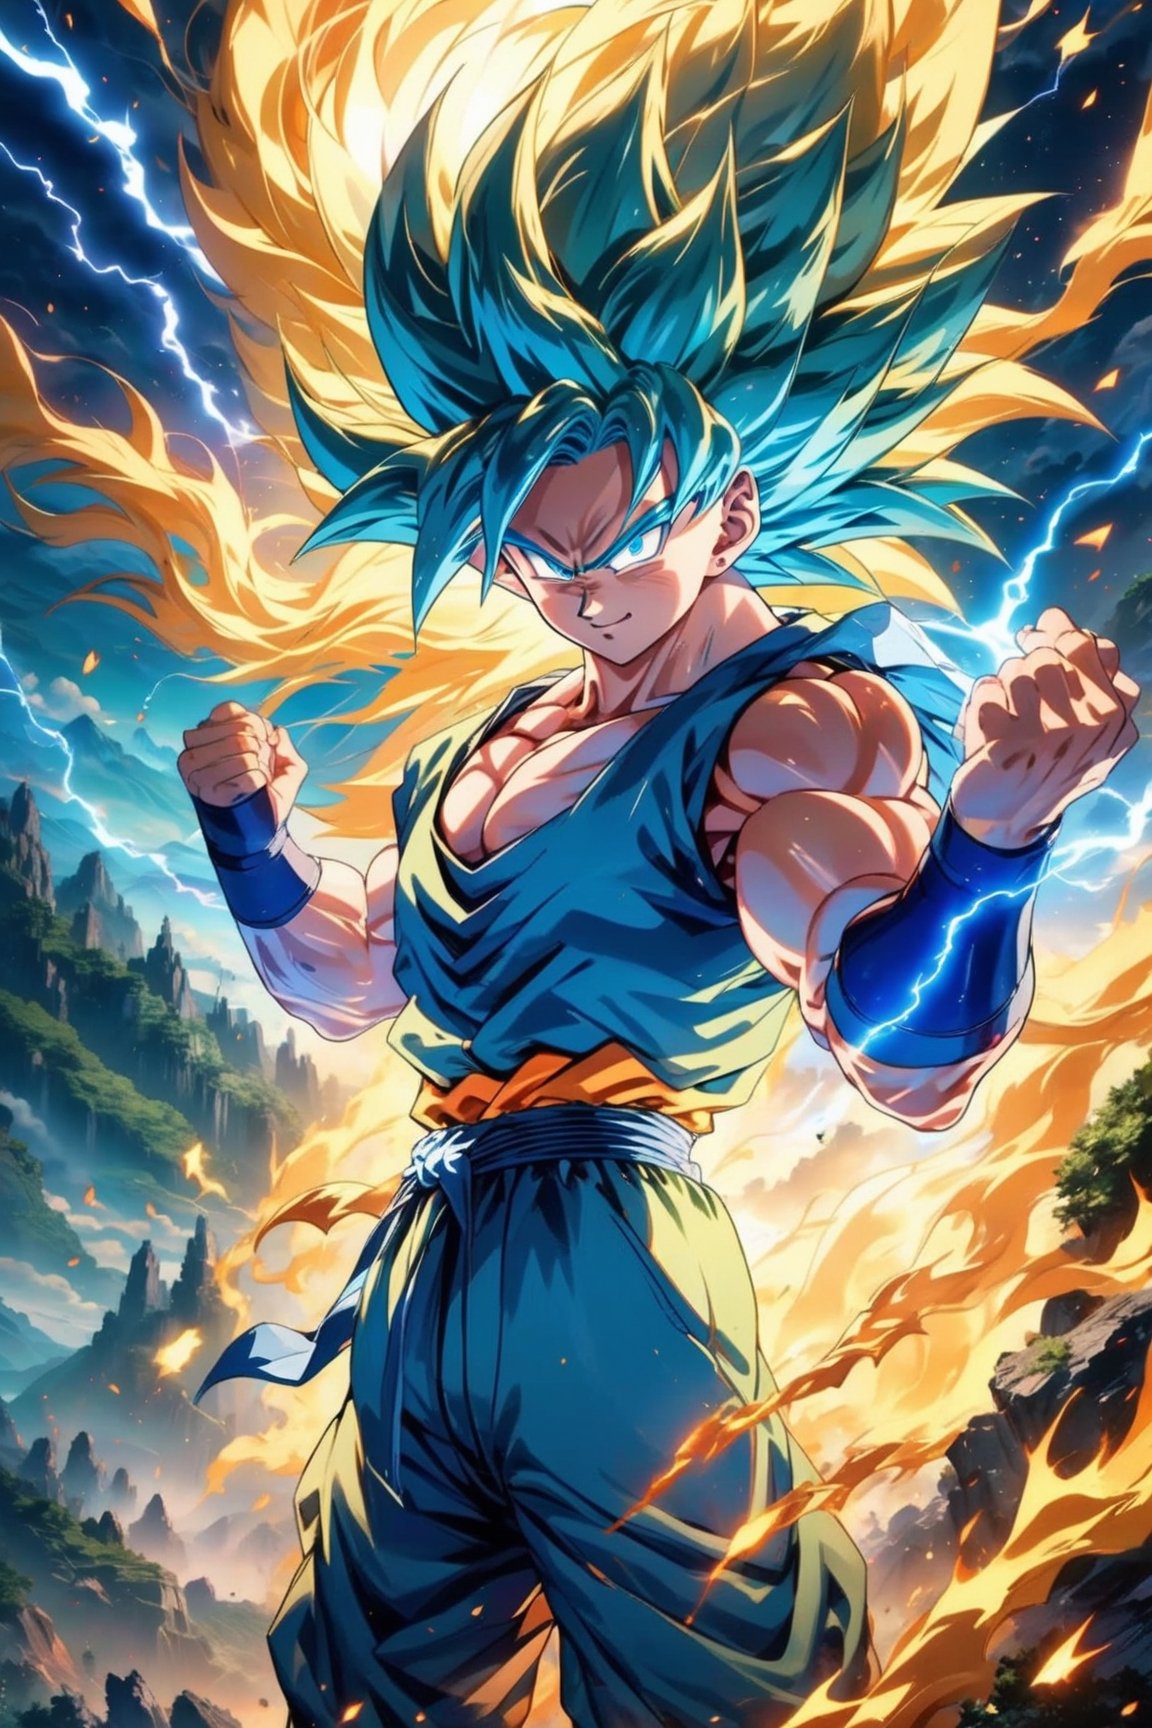 anime super Saiyan Goku, detailed anime face with blue eyes, long golden hair, and smiling, unleashes a massive energy wave while standing on top of a mountain, the surroundings are filled with lush greenery, and the sky is a mix of blue hues. (Orange smoke light energy with blue lightning emanates from his entire body). The energy wave is golden and yellow with electric sparks around it. (anime:1.2), (dramatic lighting:1.1), (vibrant colors:1.3), (cell-shaded:1.1), (dynamic composition:1.2) 
,neon photography style